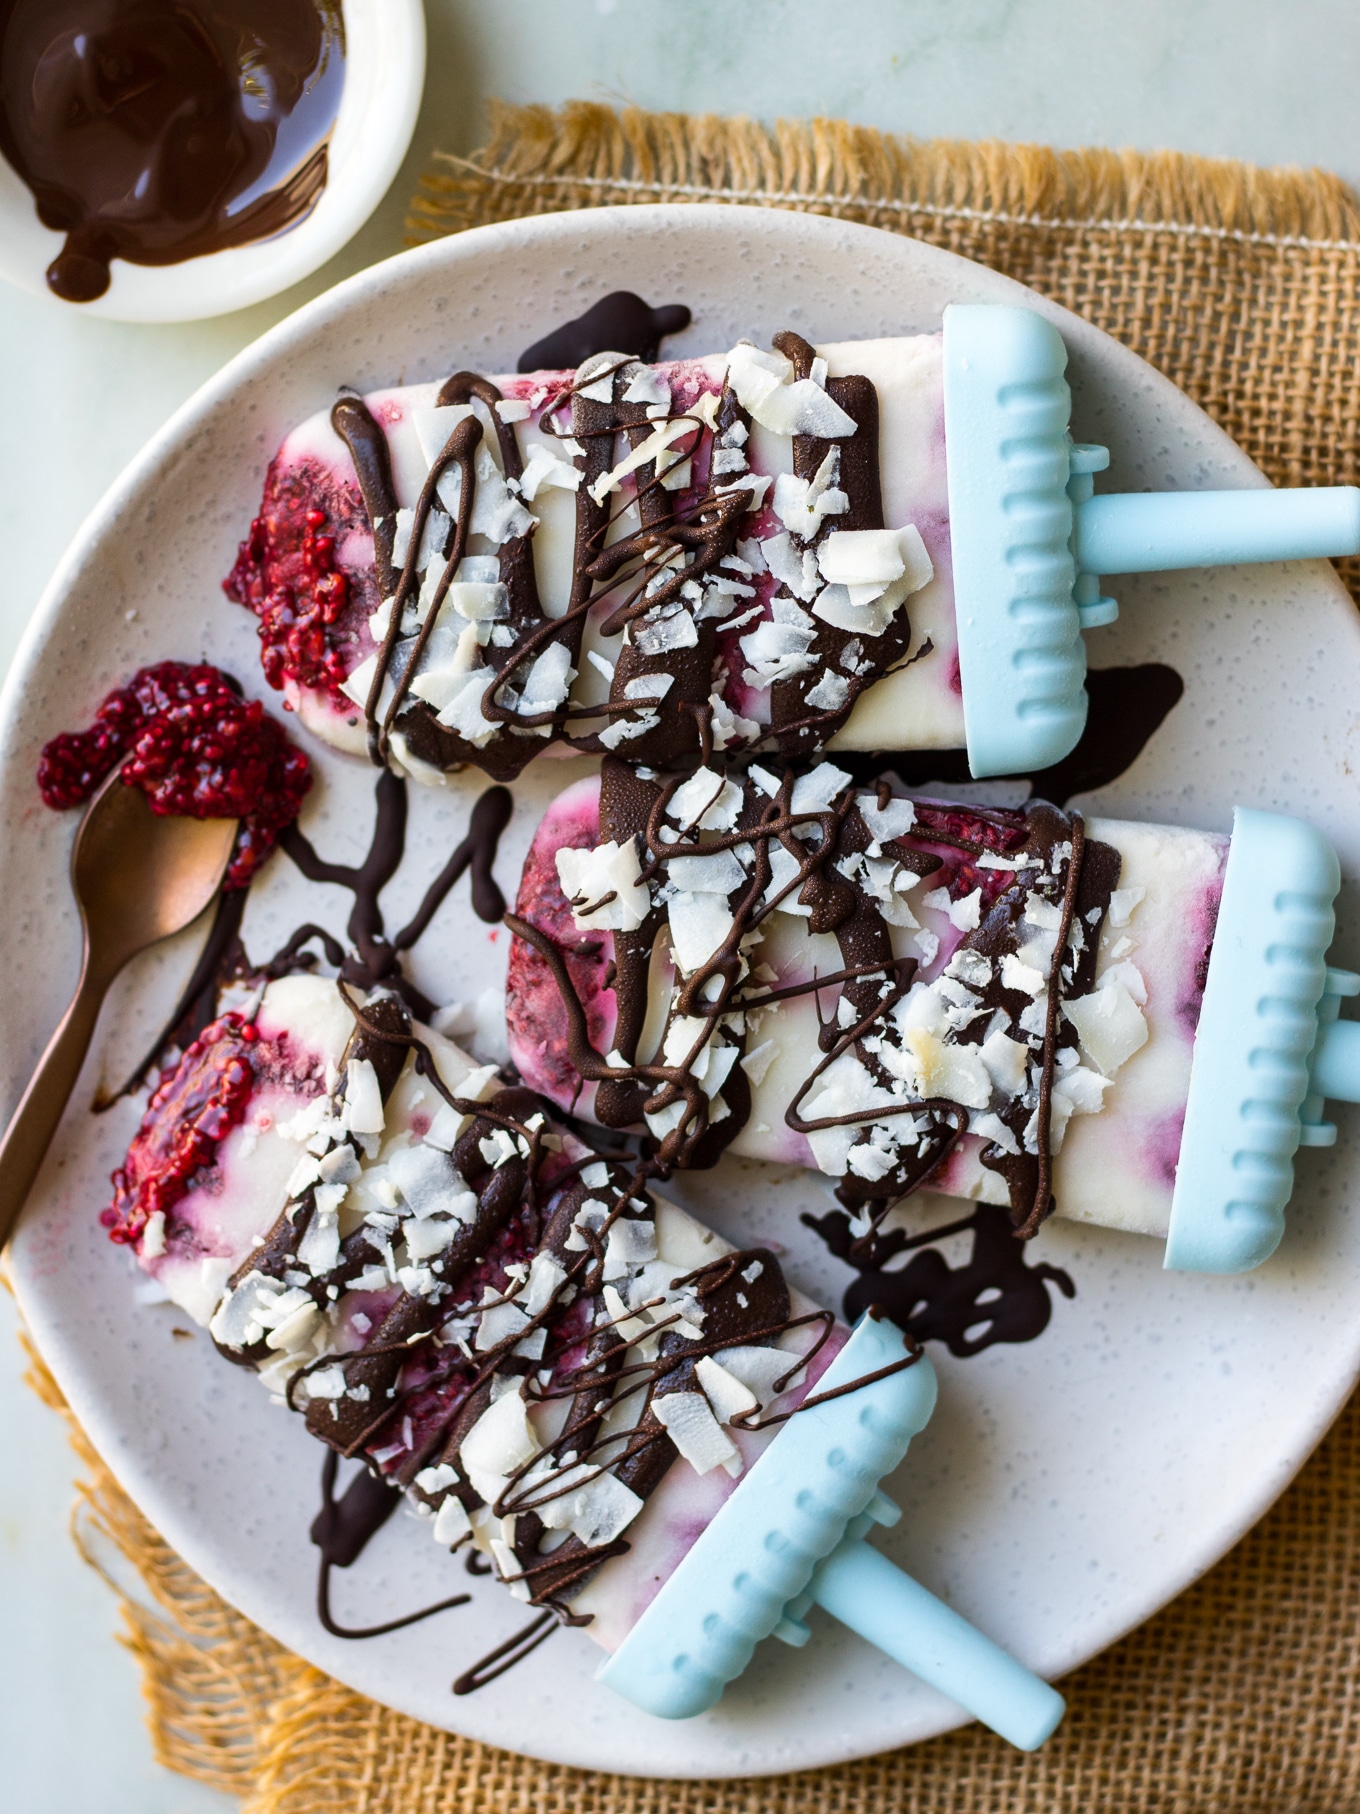 Creamy coconut lamington popsicles with raspberry chia jam, dark chocolate and coconut flakes. These dairy free, #vegan frozen treats are a fun healthy way to get a lamington fix! #popsicles #lamington #dairyfree